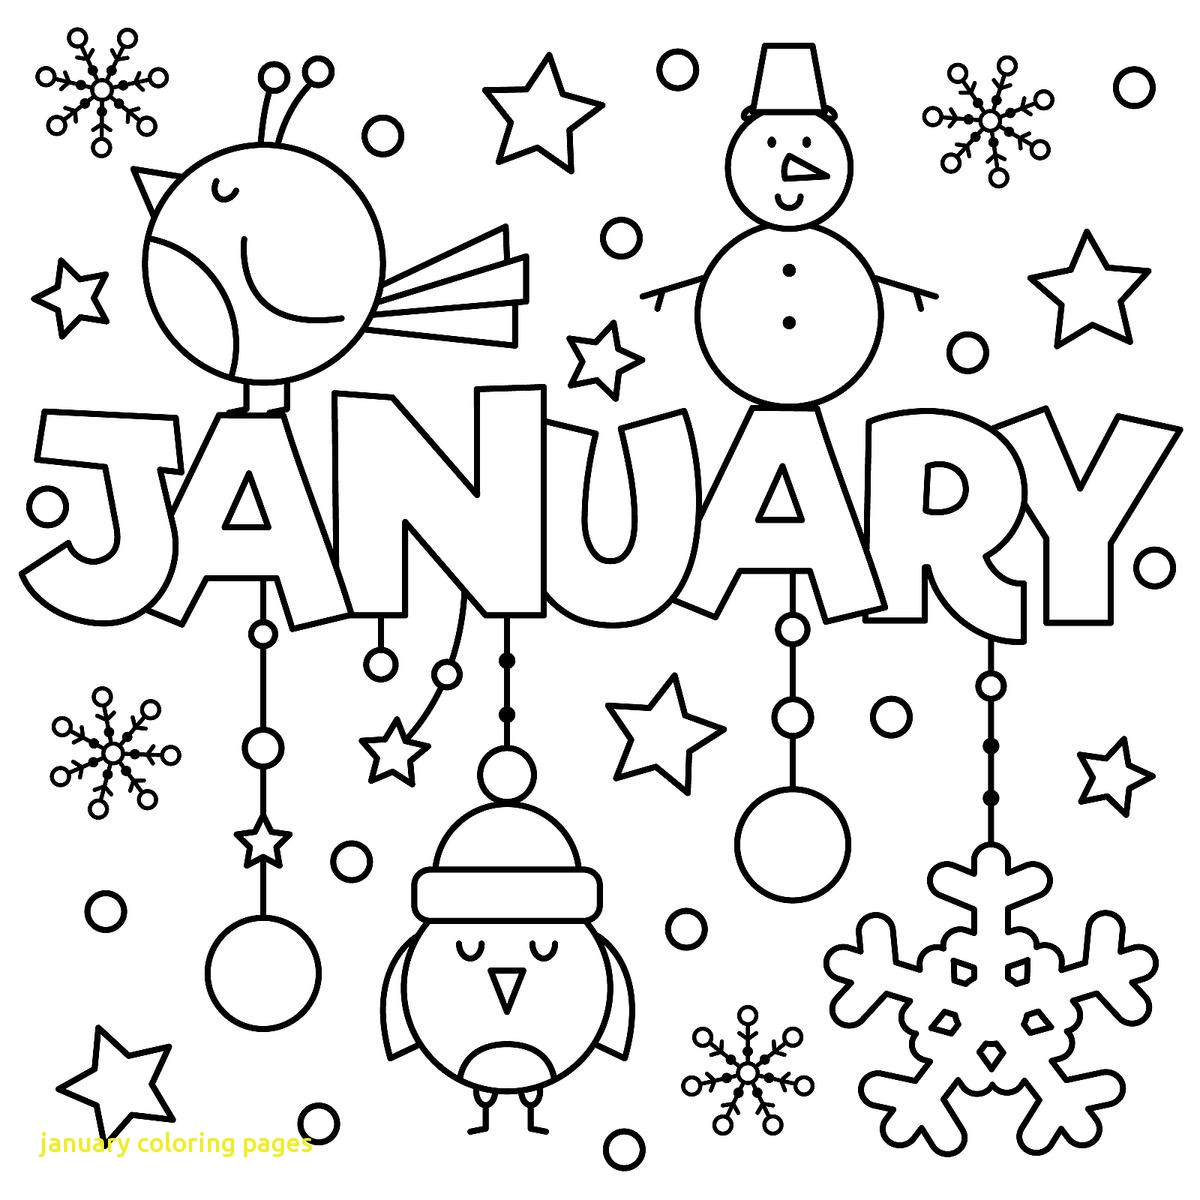 January Coloring Pages Printable At Getcolorings Com Free Printable Colorings Pages To Print